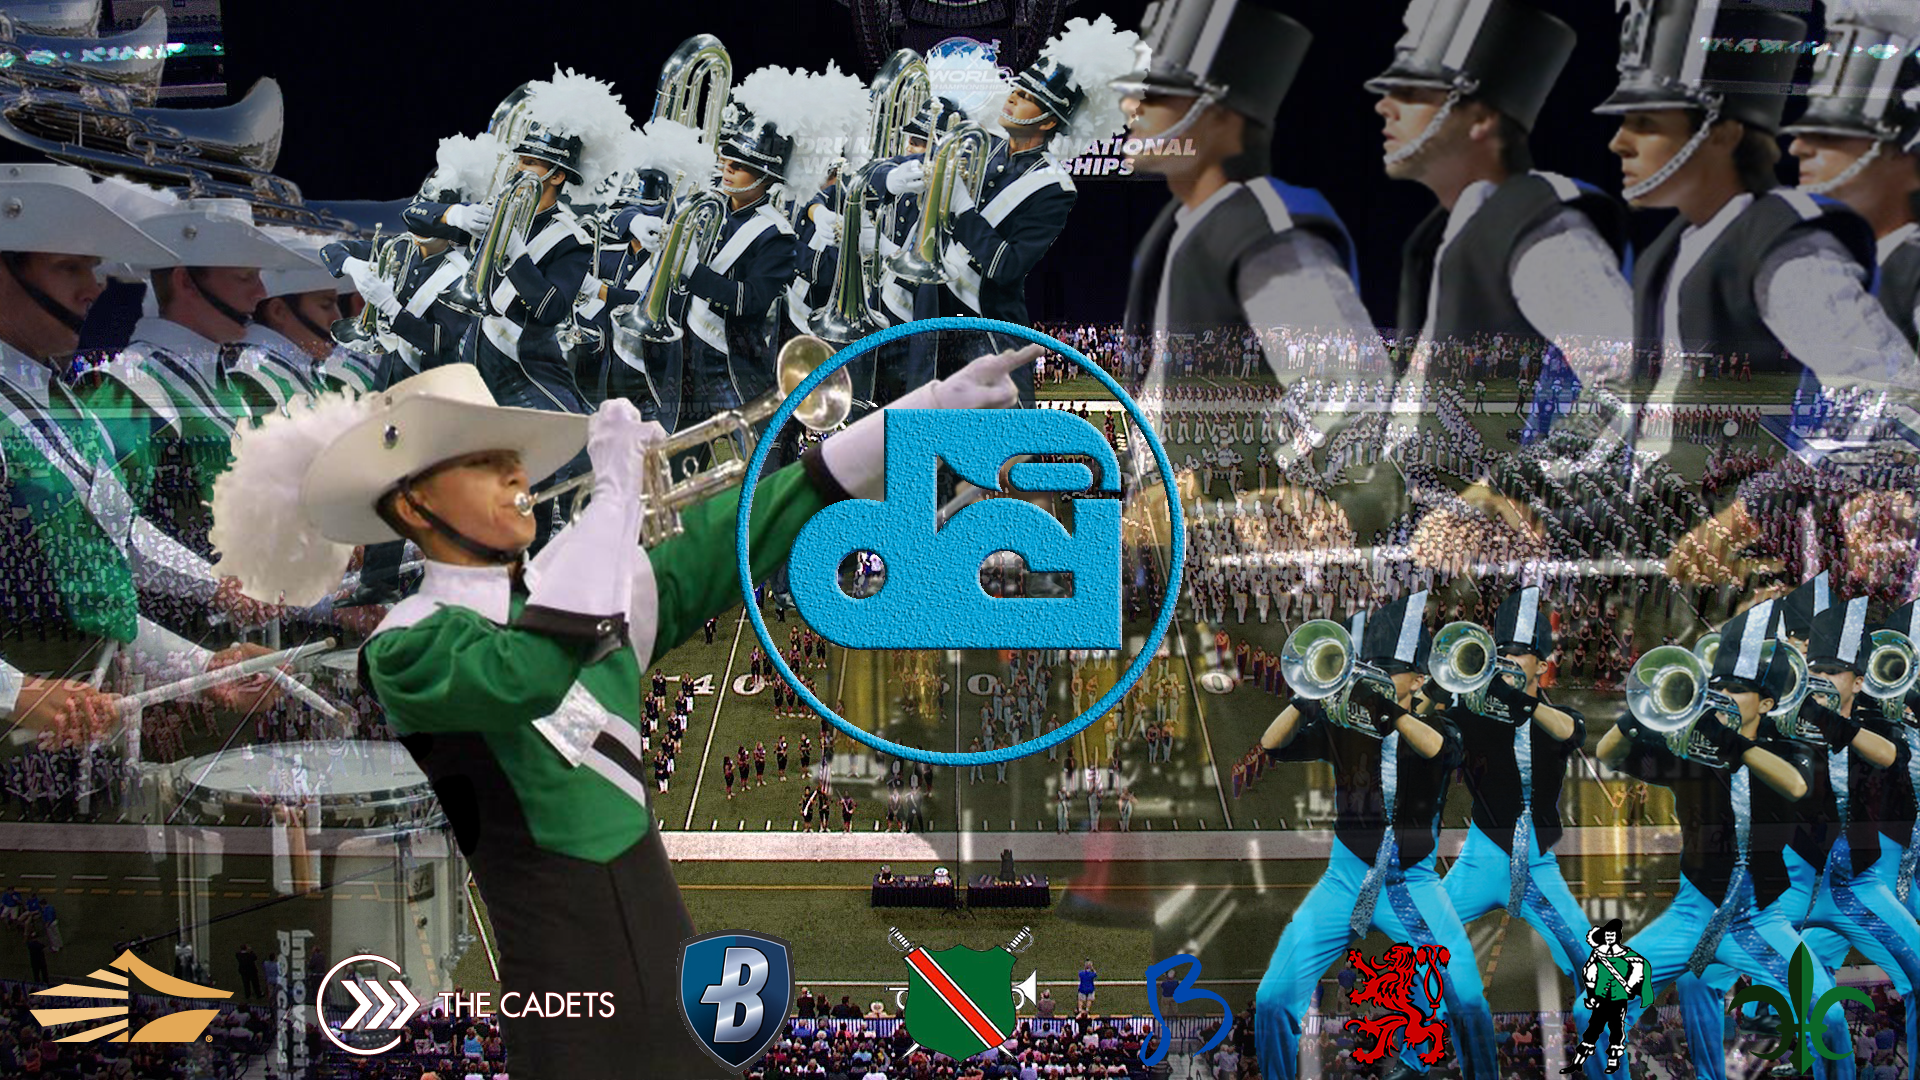 DCI Wallpapers #1 - dci post - Imgur